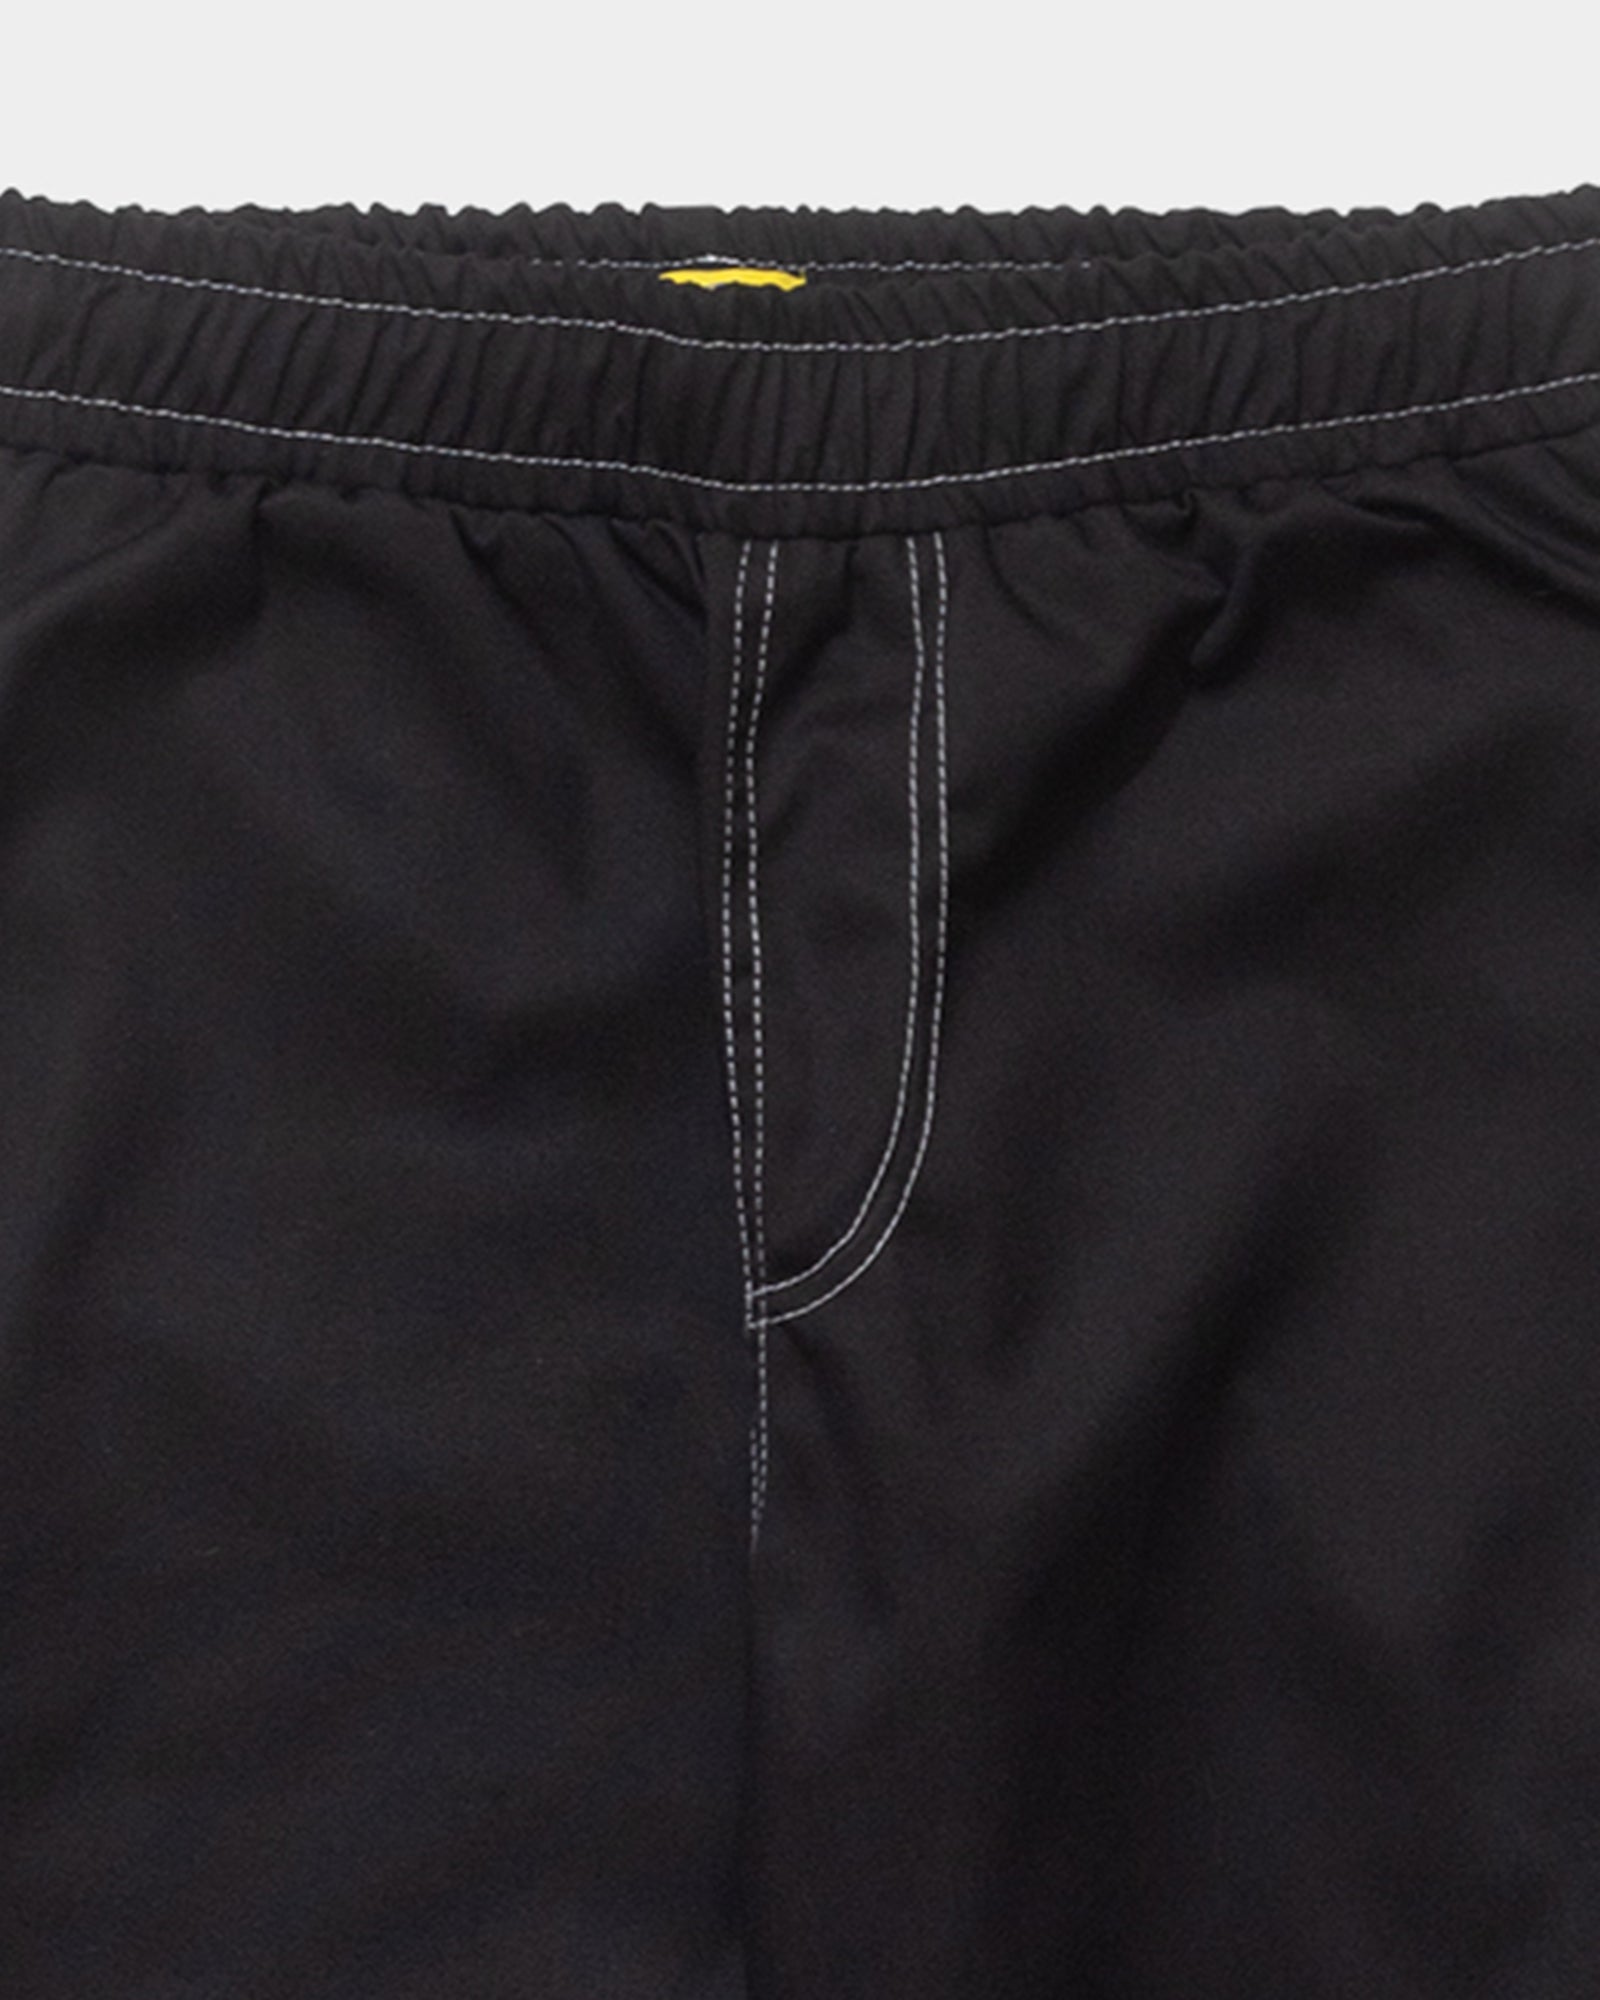 All-Rounder Pants (Black)